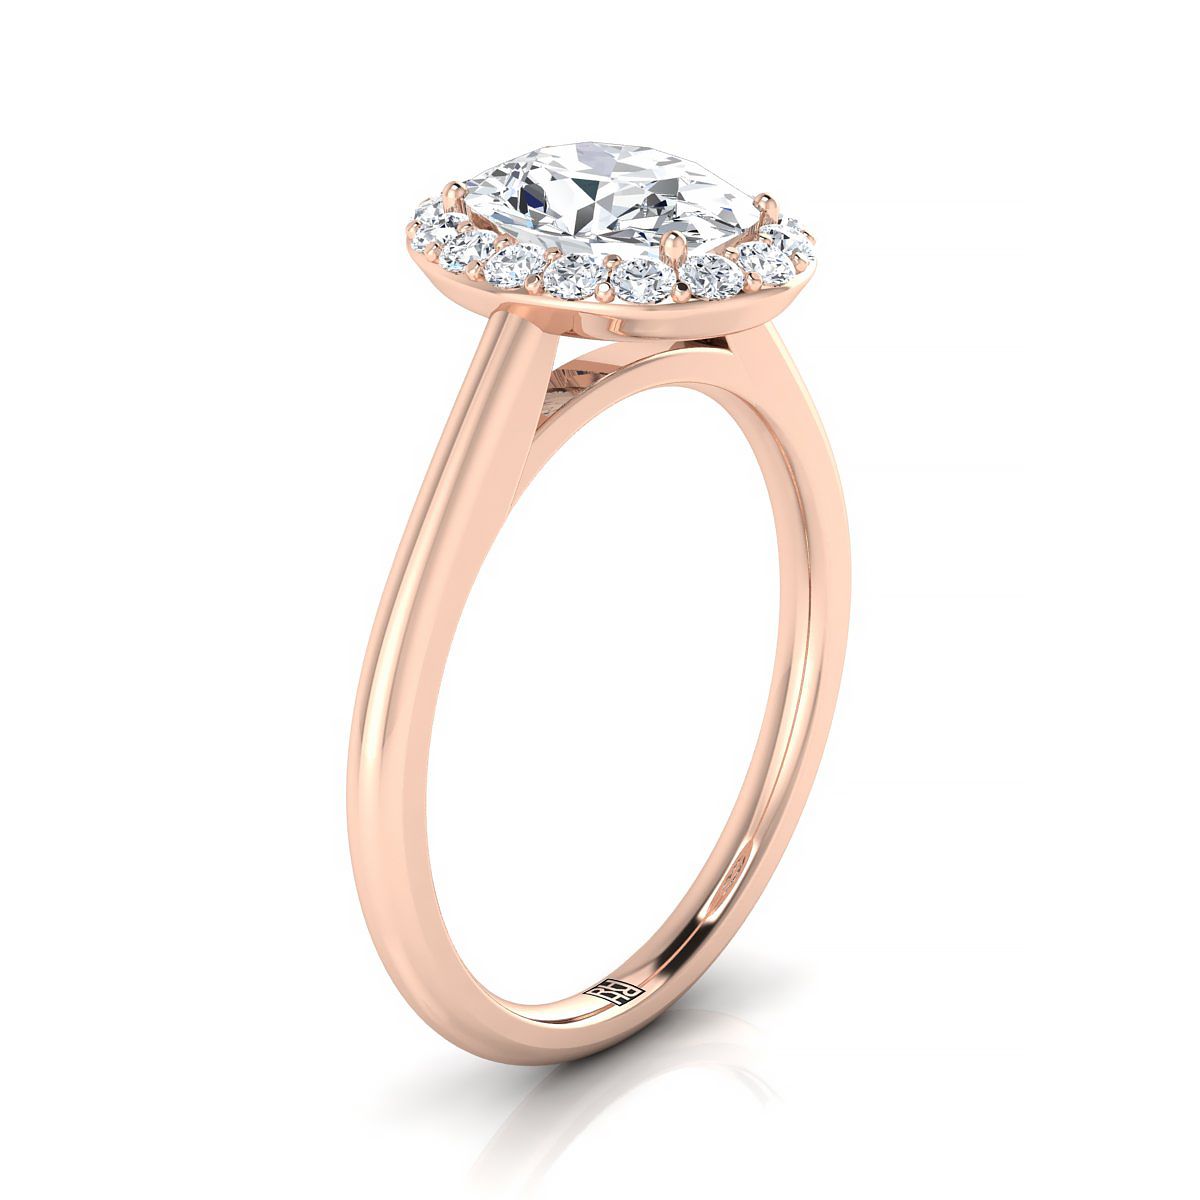 14K Rose Gold Oval Emerald Shared Prong Diamond Halo Engagement Ring -1/5ctw